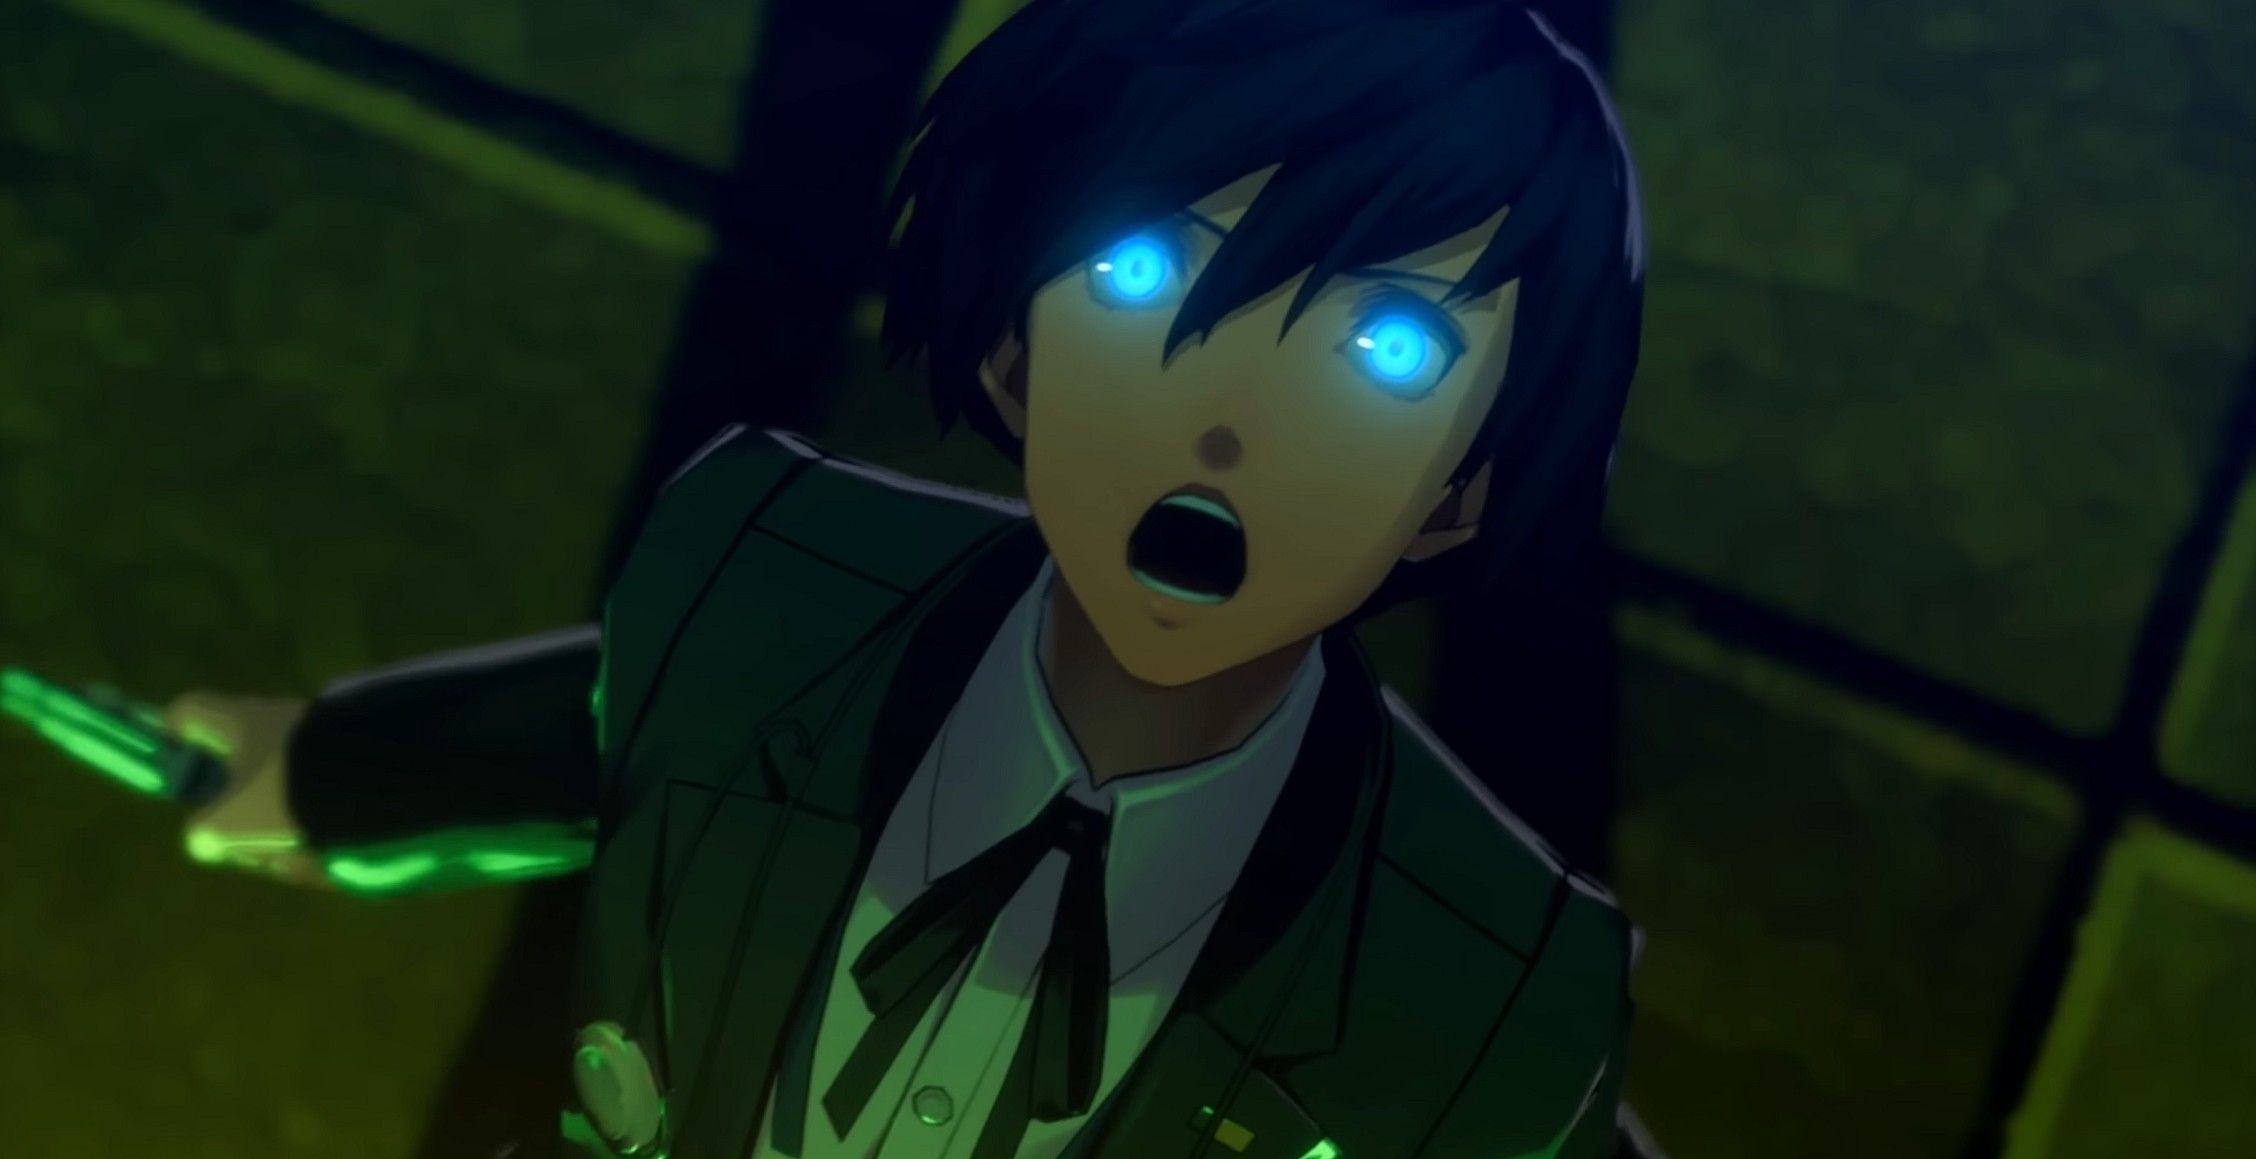 makoto awakening to his persona for the first time persona 3 reload